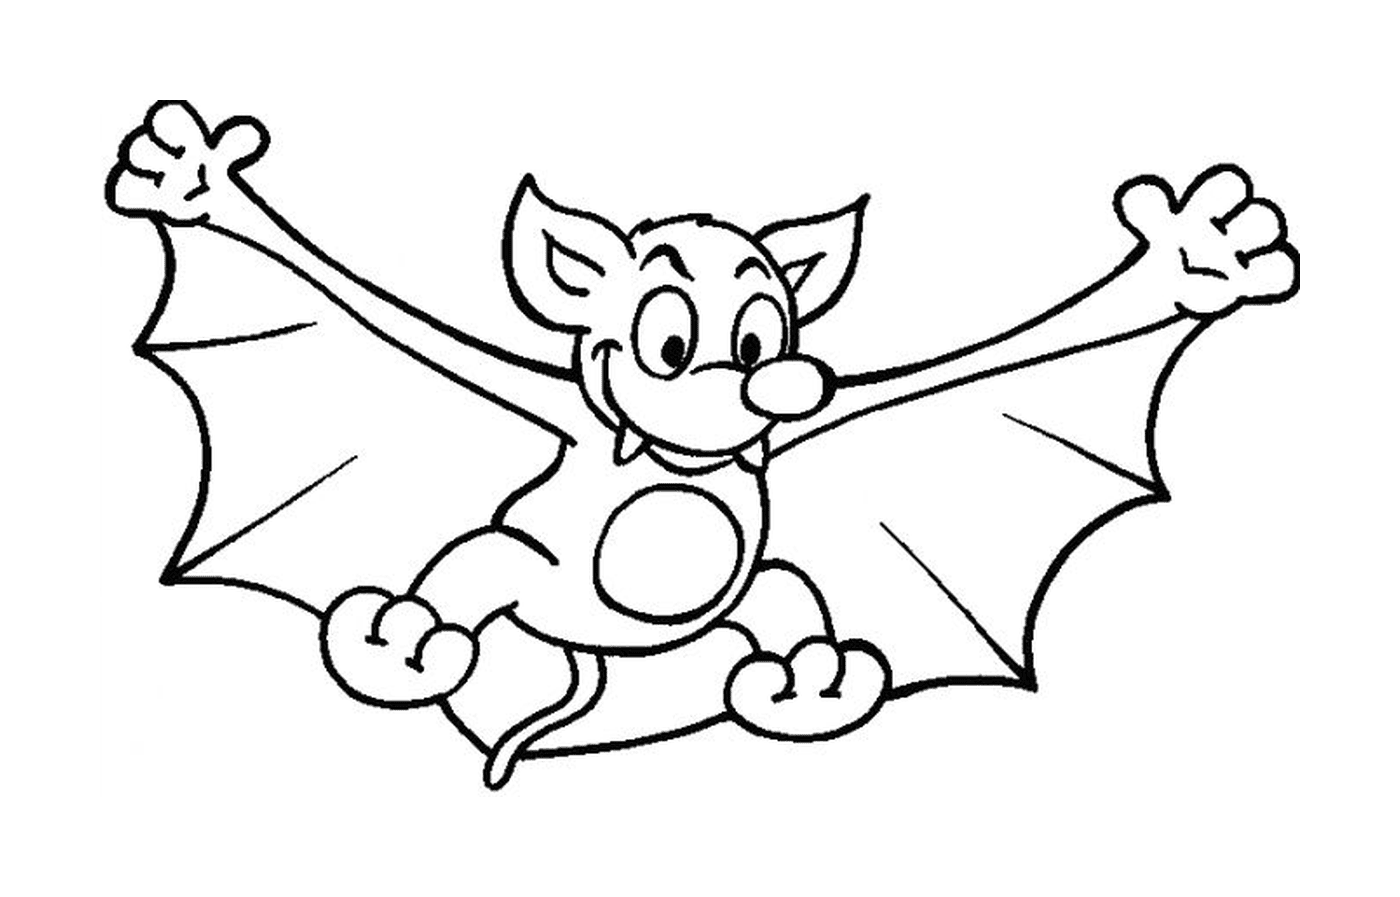  scary bat for Halloween 